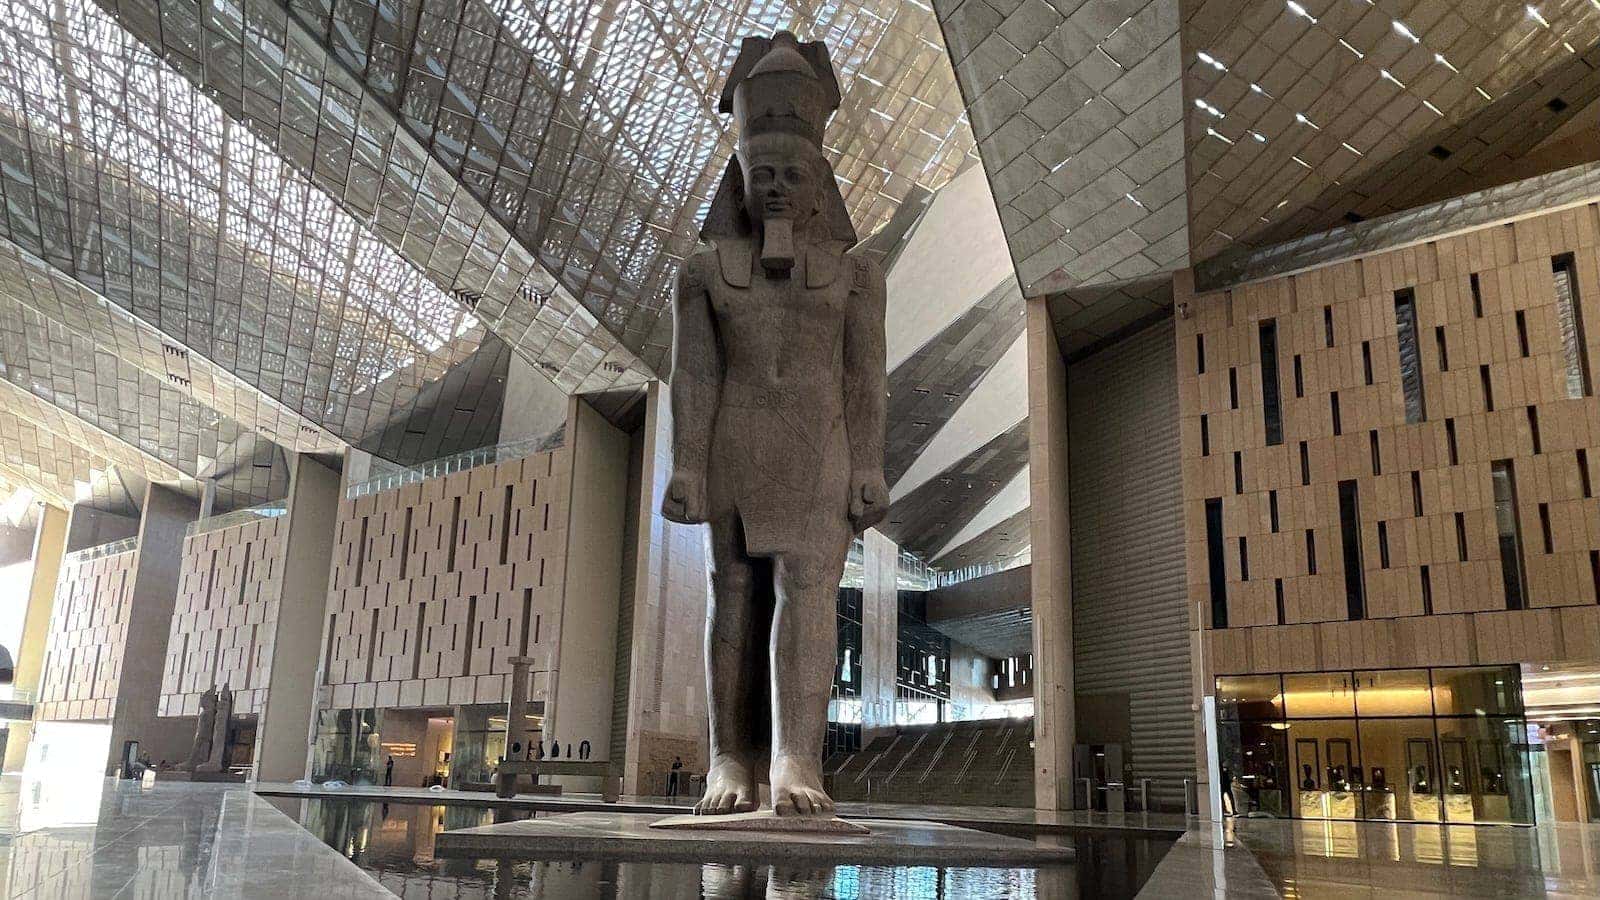 Ramses II giant statue at the Grand Egyptian Museum in Giza.